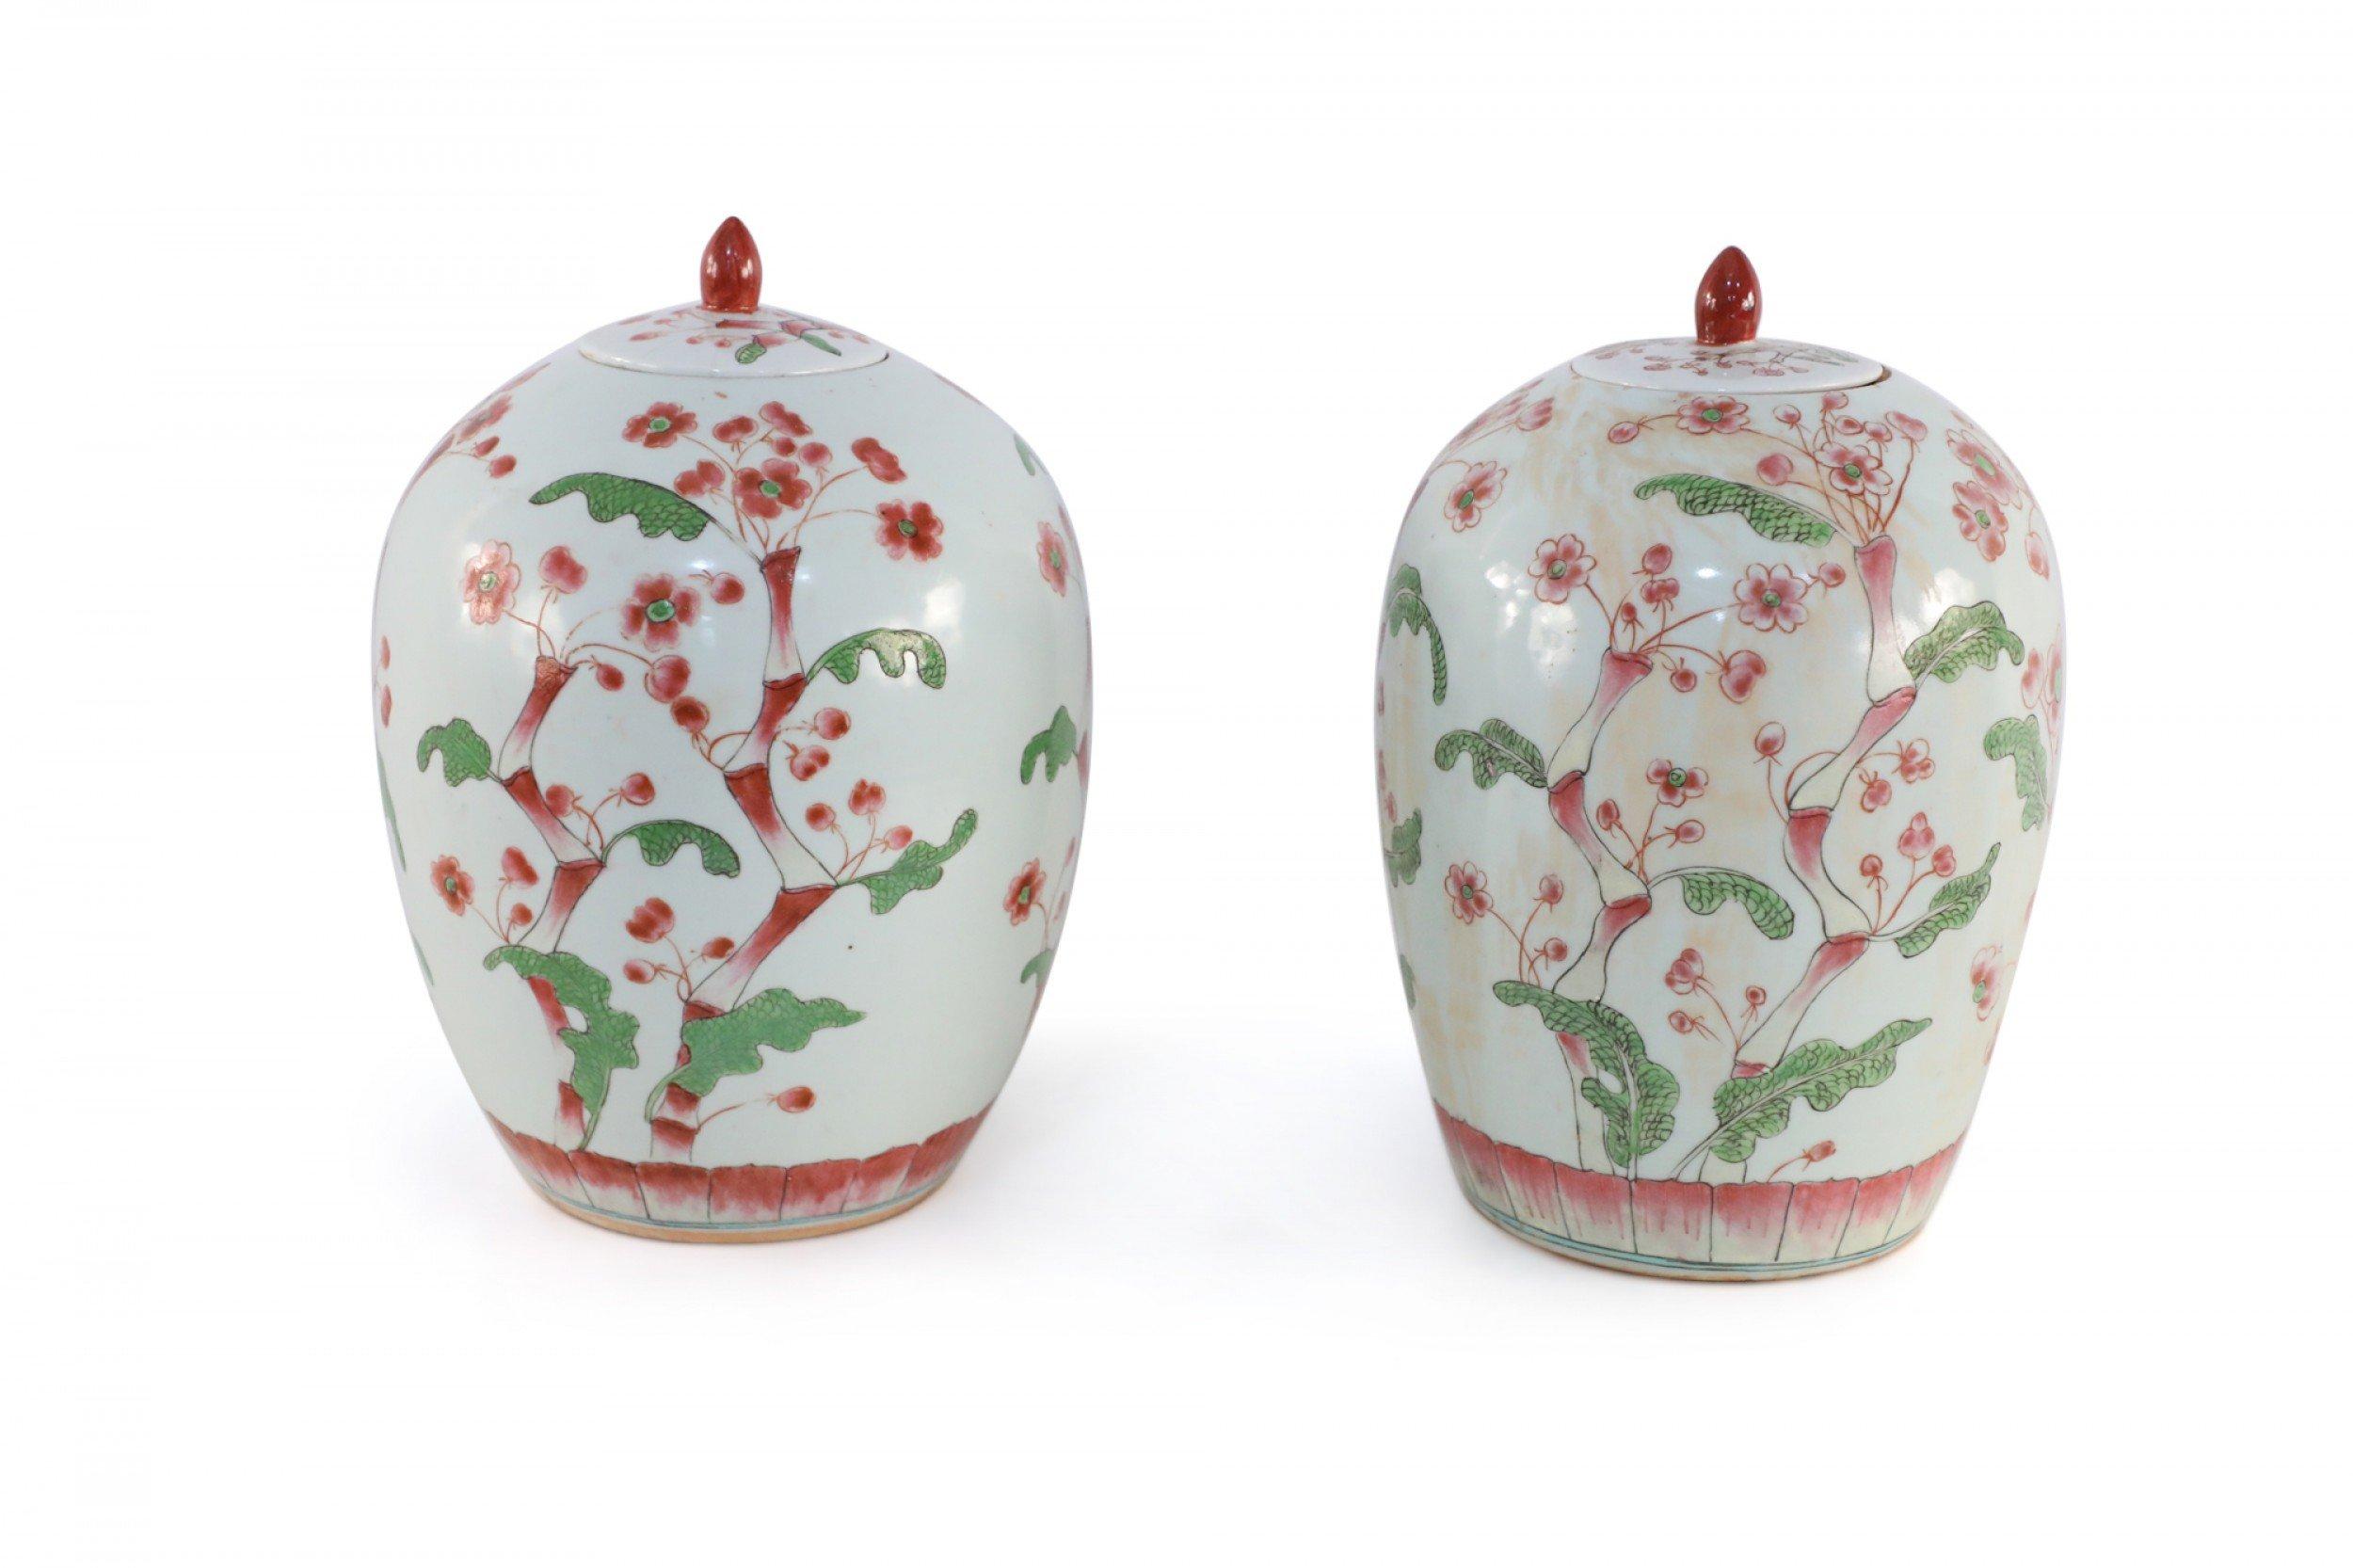 Pair of Chinese White and Pink Cherry Blossom Motif Lidded Porcelain Urns For Sale 2